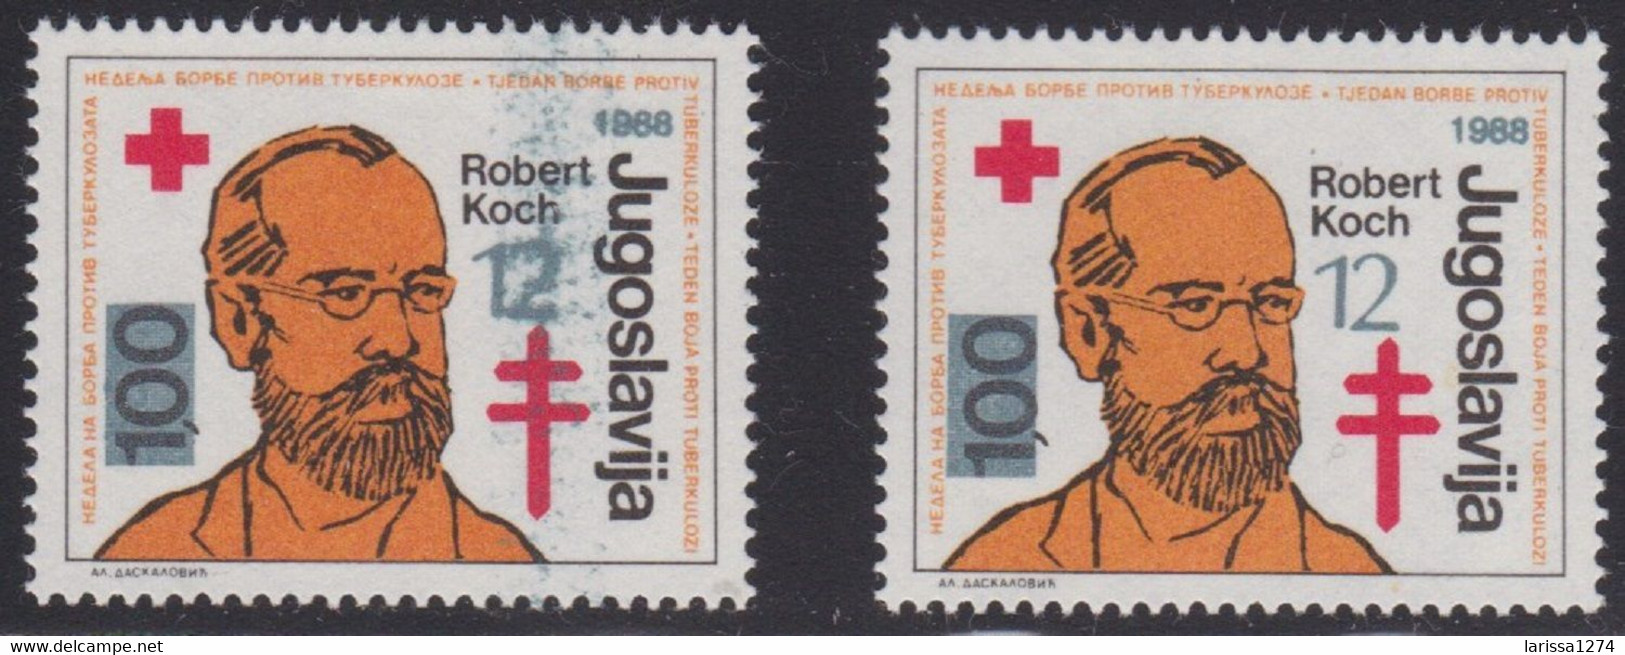 445. Yugoslavia 1988 Surcharge Robert Koch ERROR Stained Overprint MNH Michel #165 - Imperforates, Proofs & Errors